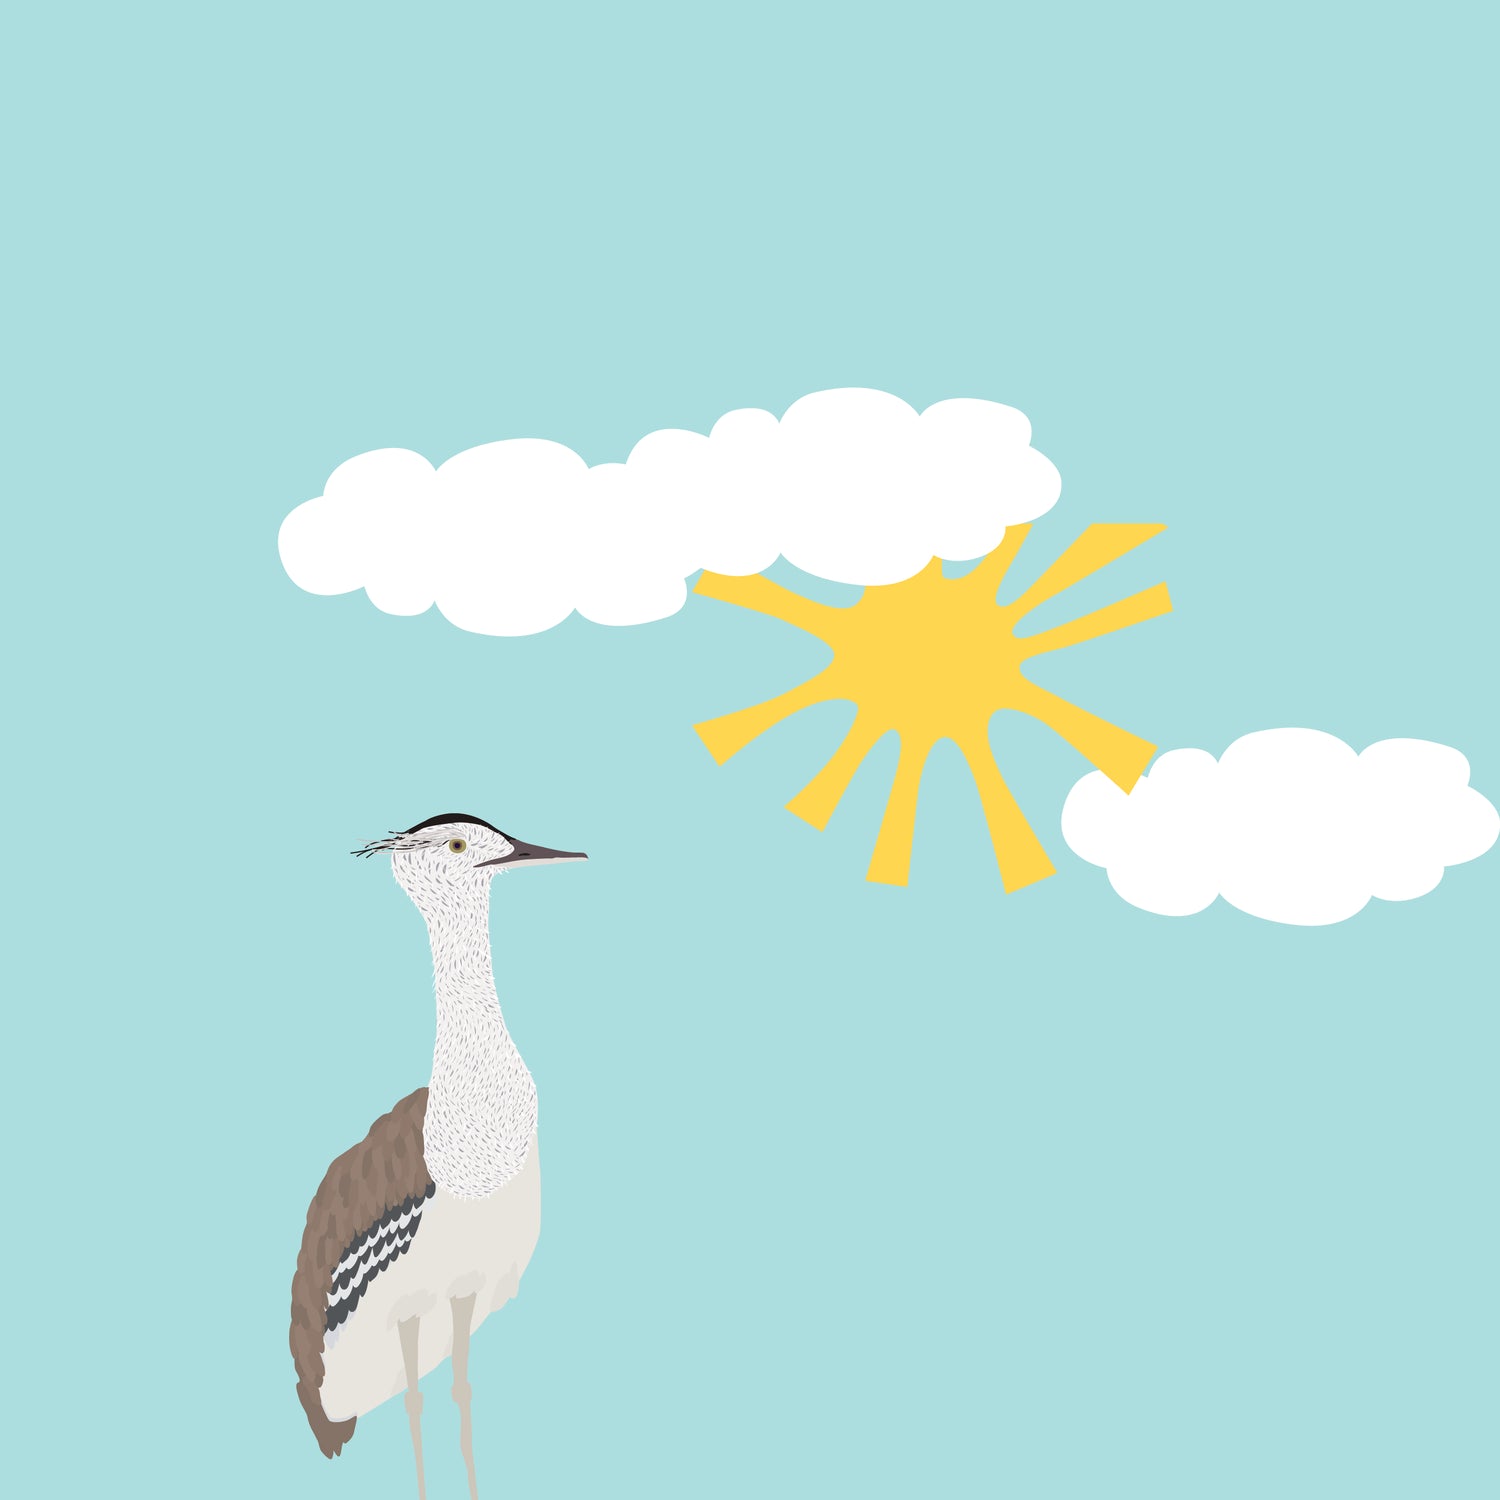 Bird with a sun and a teal background